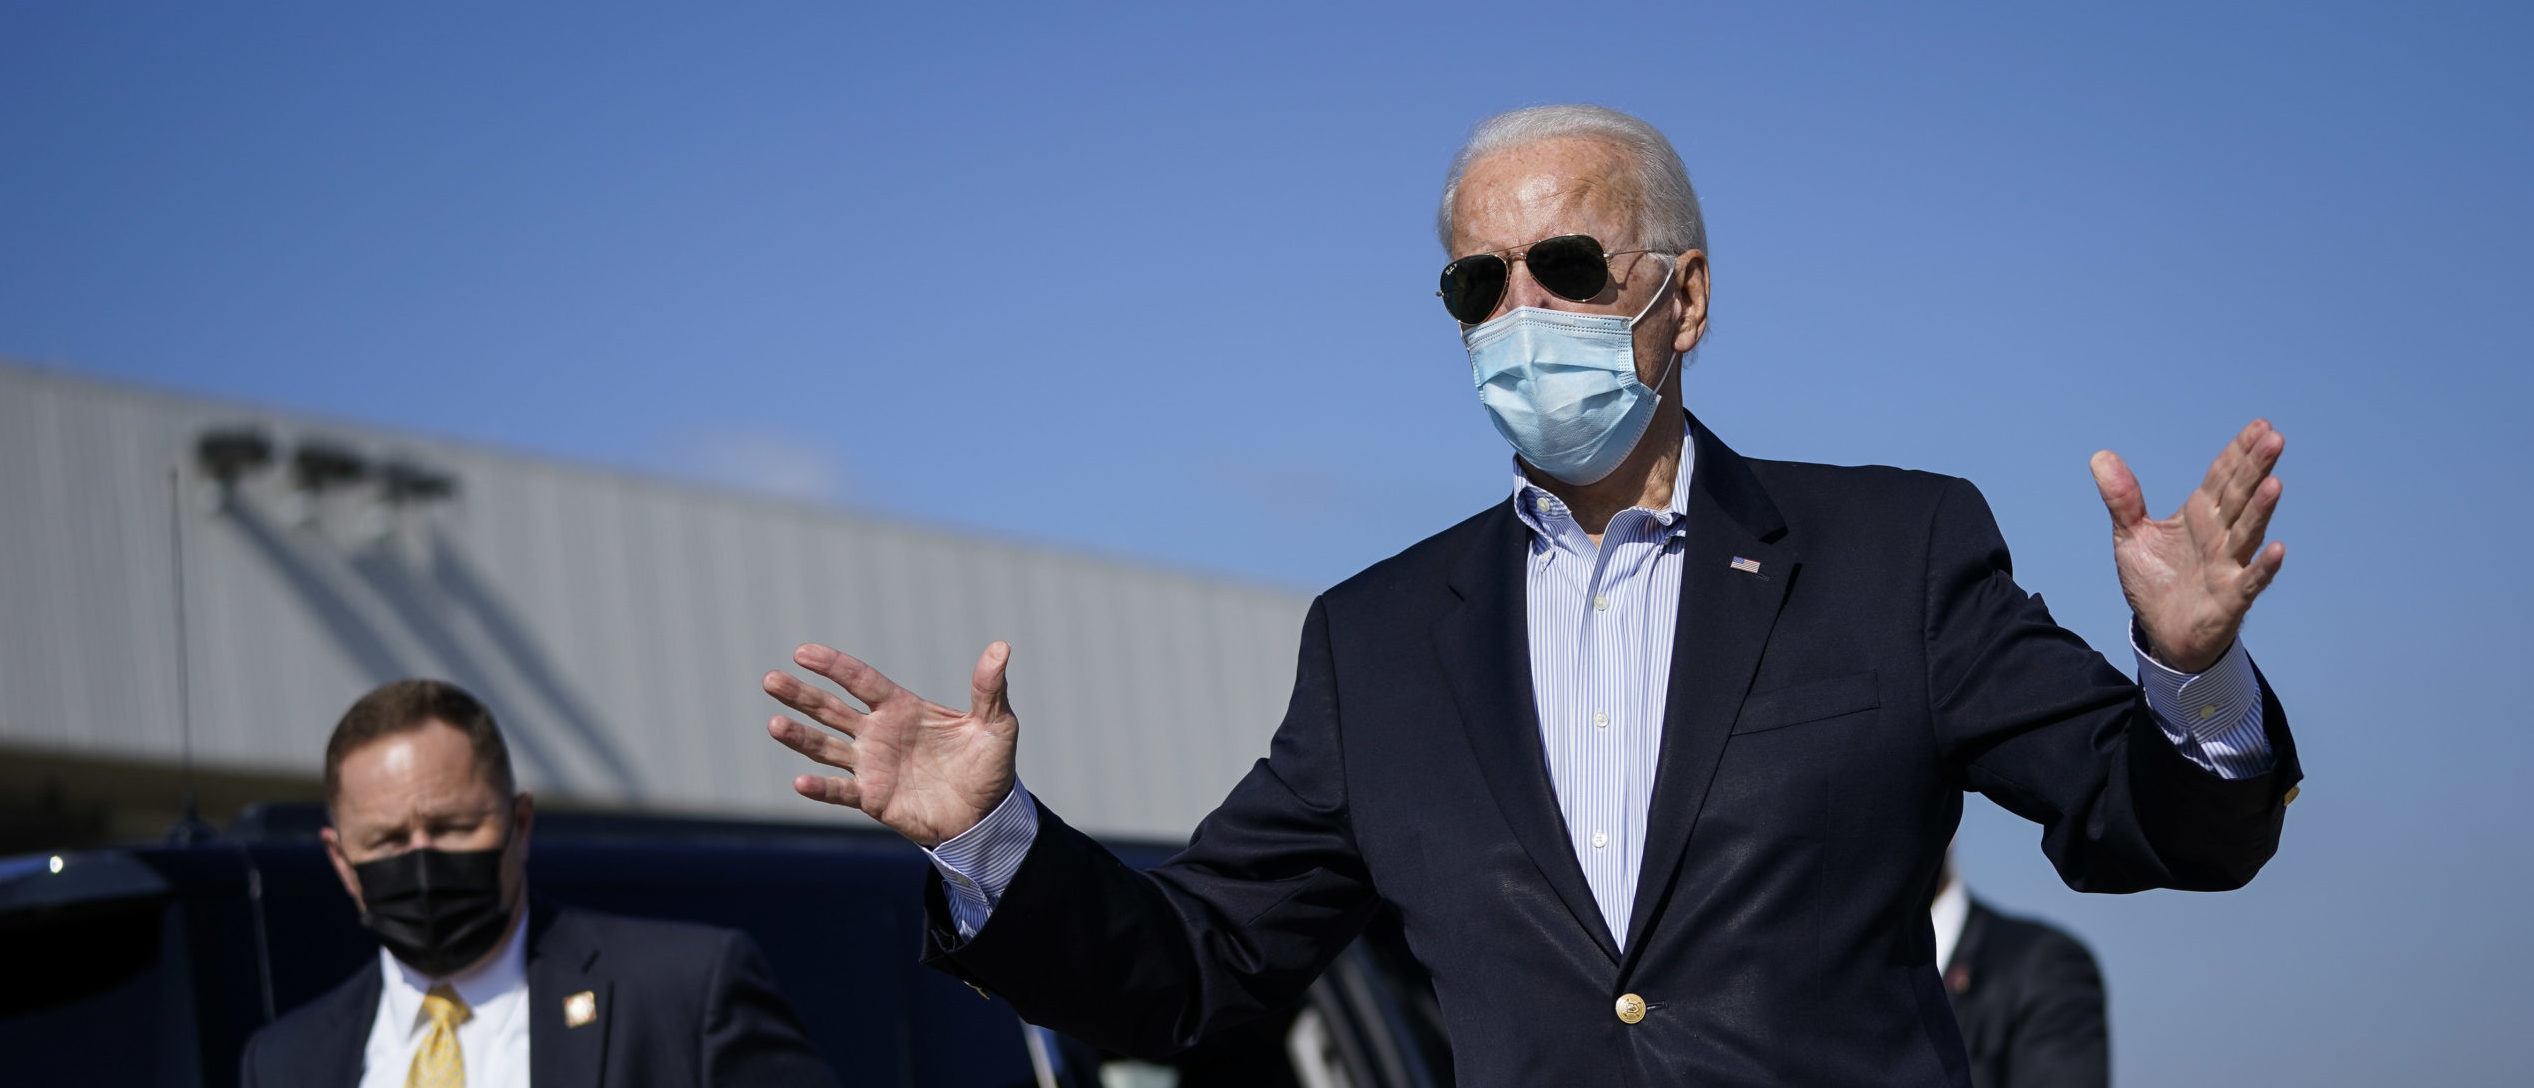 Democratic presidential nominee Joe Biden speaks to reporters before boarding his campaign plane at New Castle Airport on October 22, 2020 in New Castle, Delaware. (Drew Angerer/Getty Images)